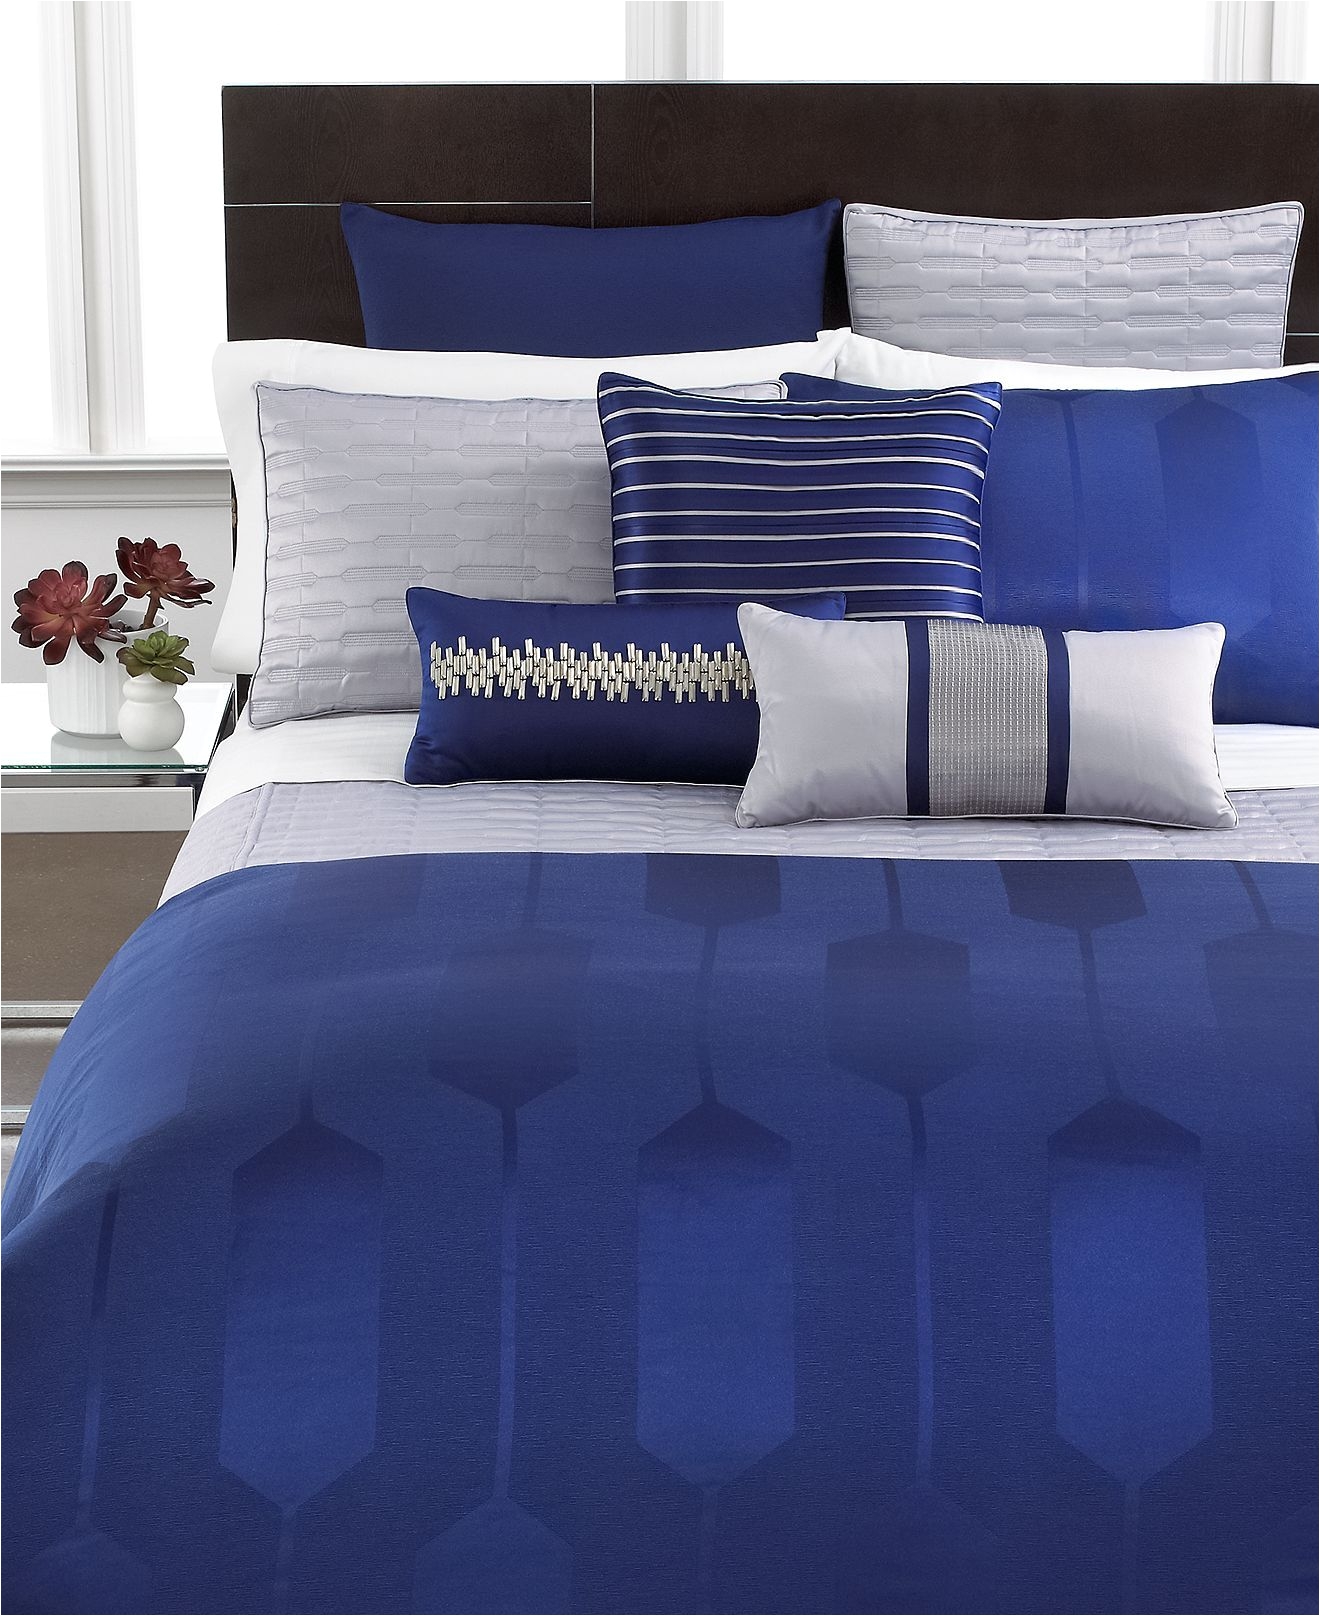 hotel collection links cobalt bedding collection i currently have this set and it is beautiful i bought the dark gray sheets pillow cases instead of the